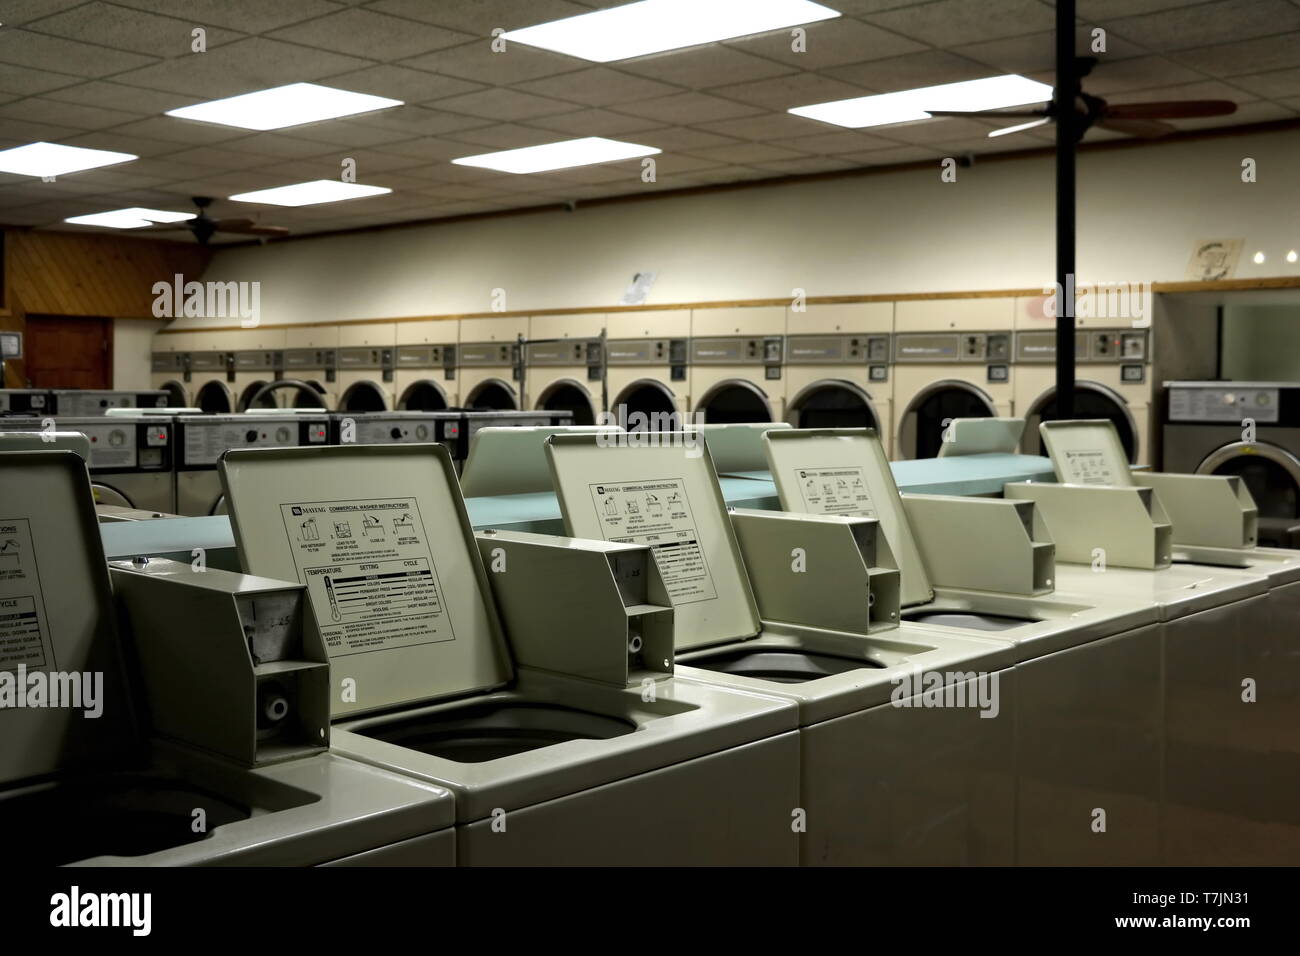 a coin operated laundromat in the suburbs (April 16, 2019) Stock Photo